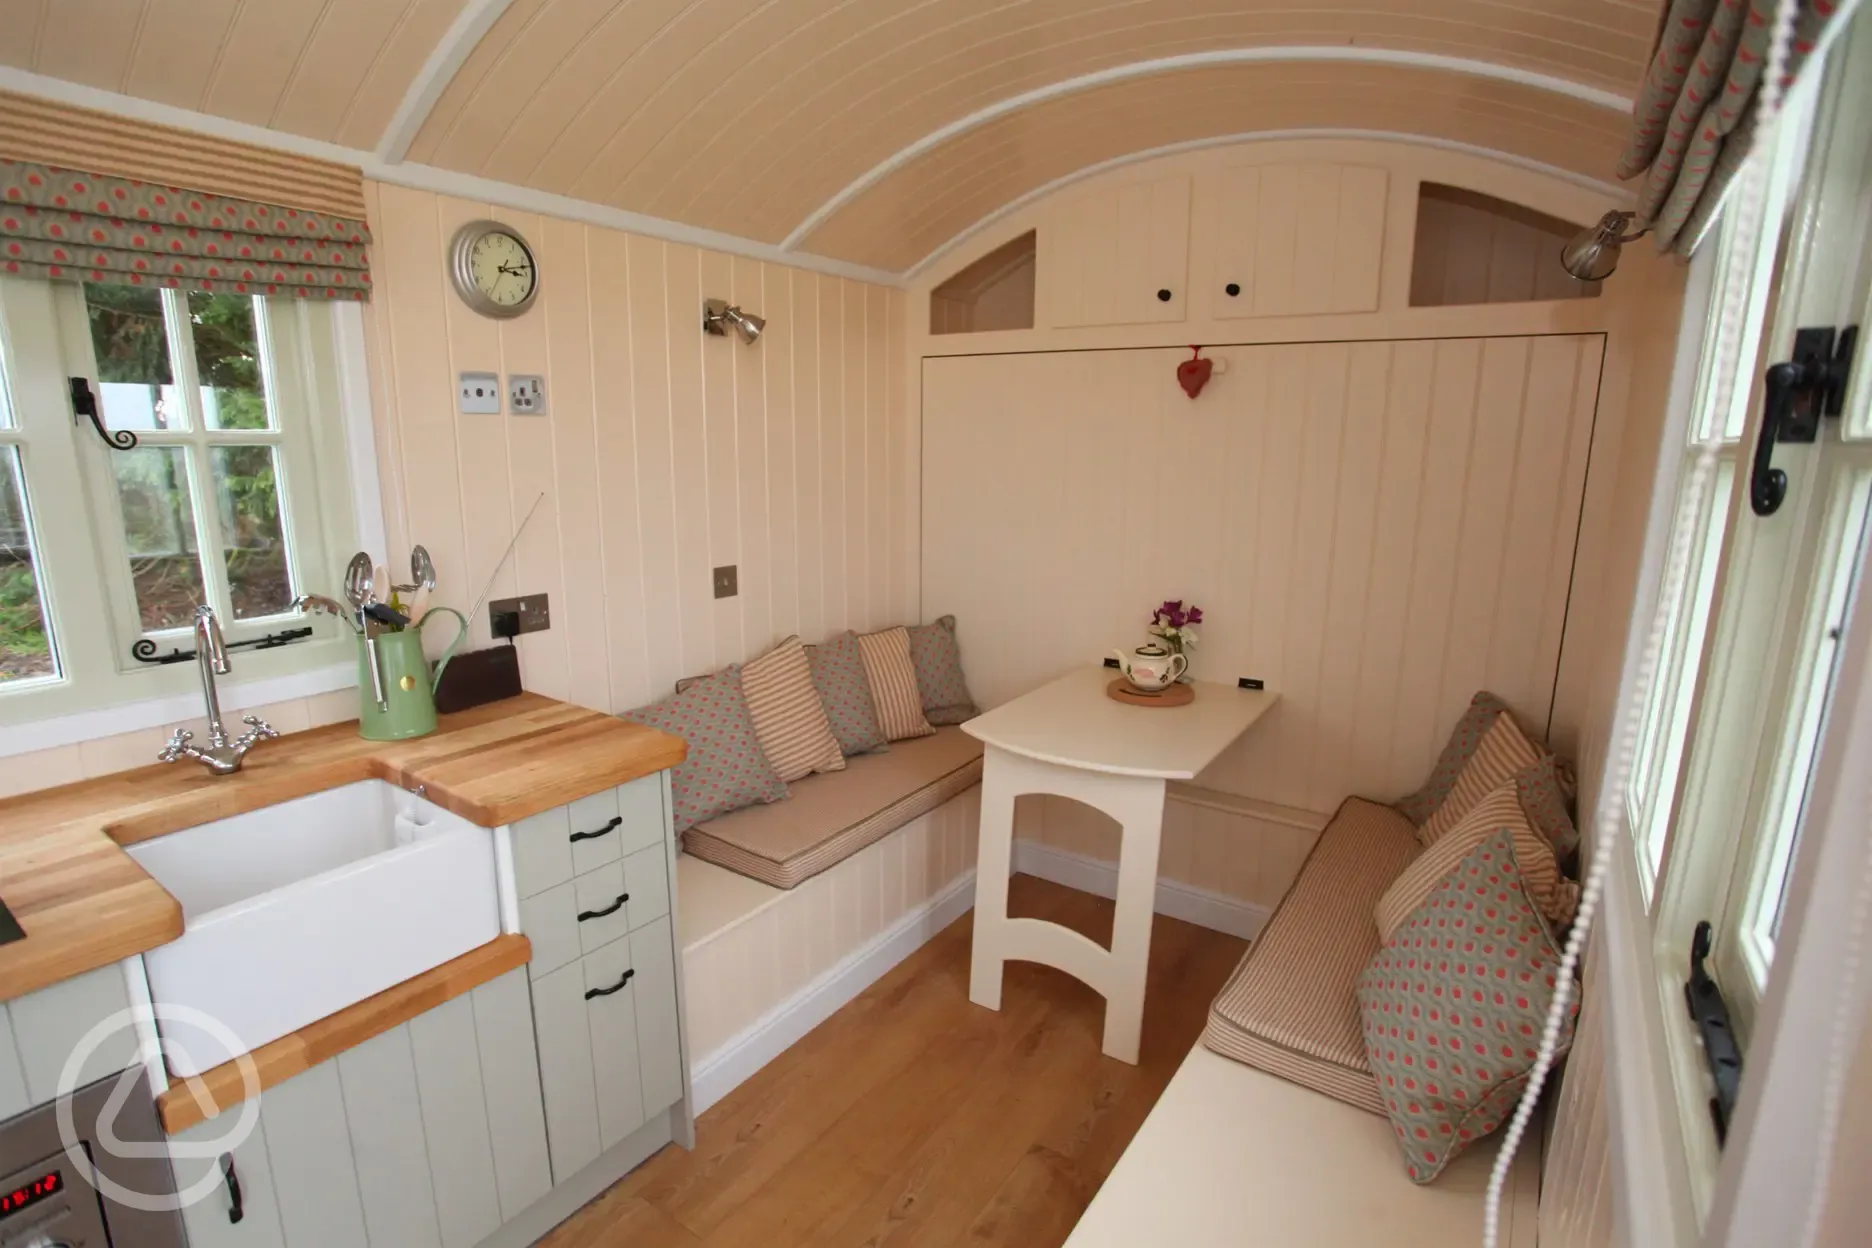 Inside the hut, kitchen and seating area